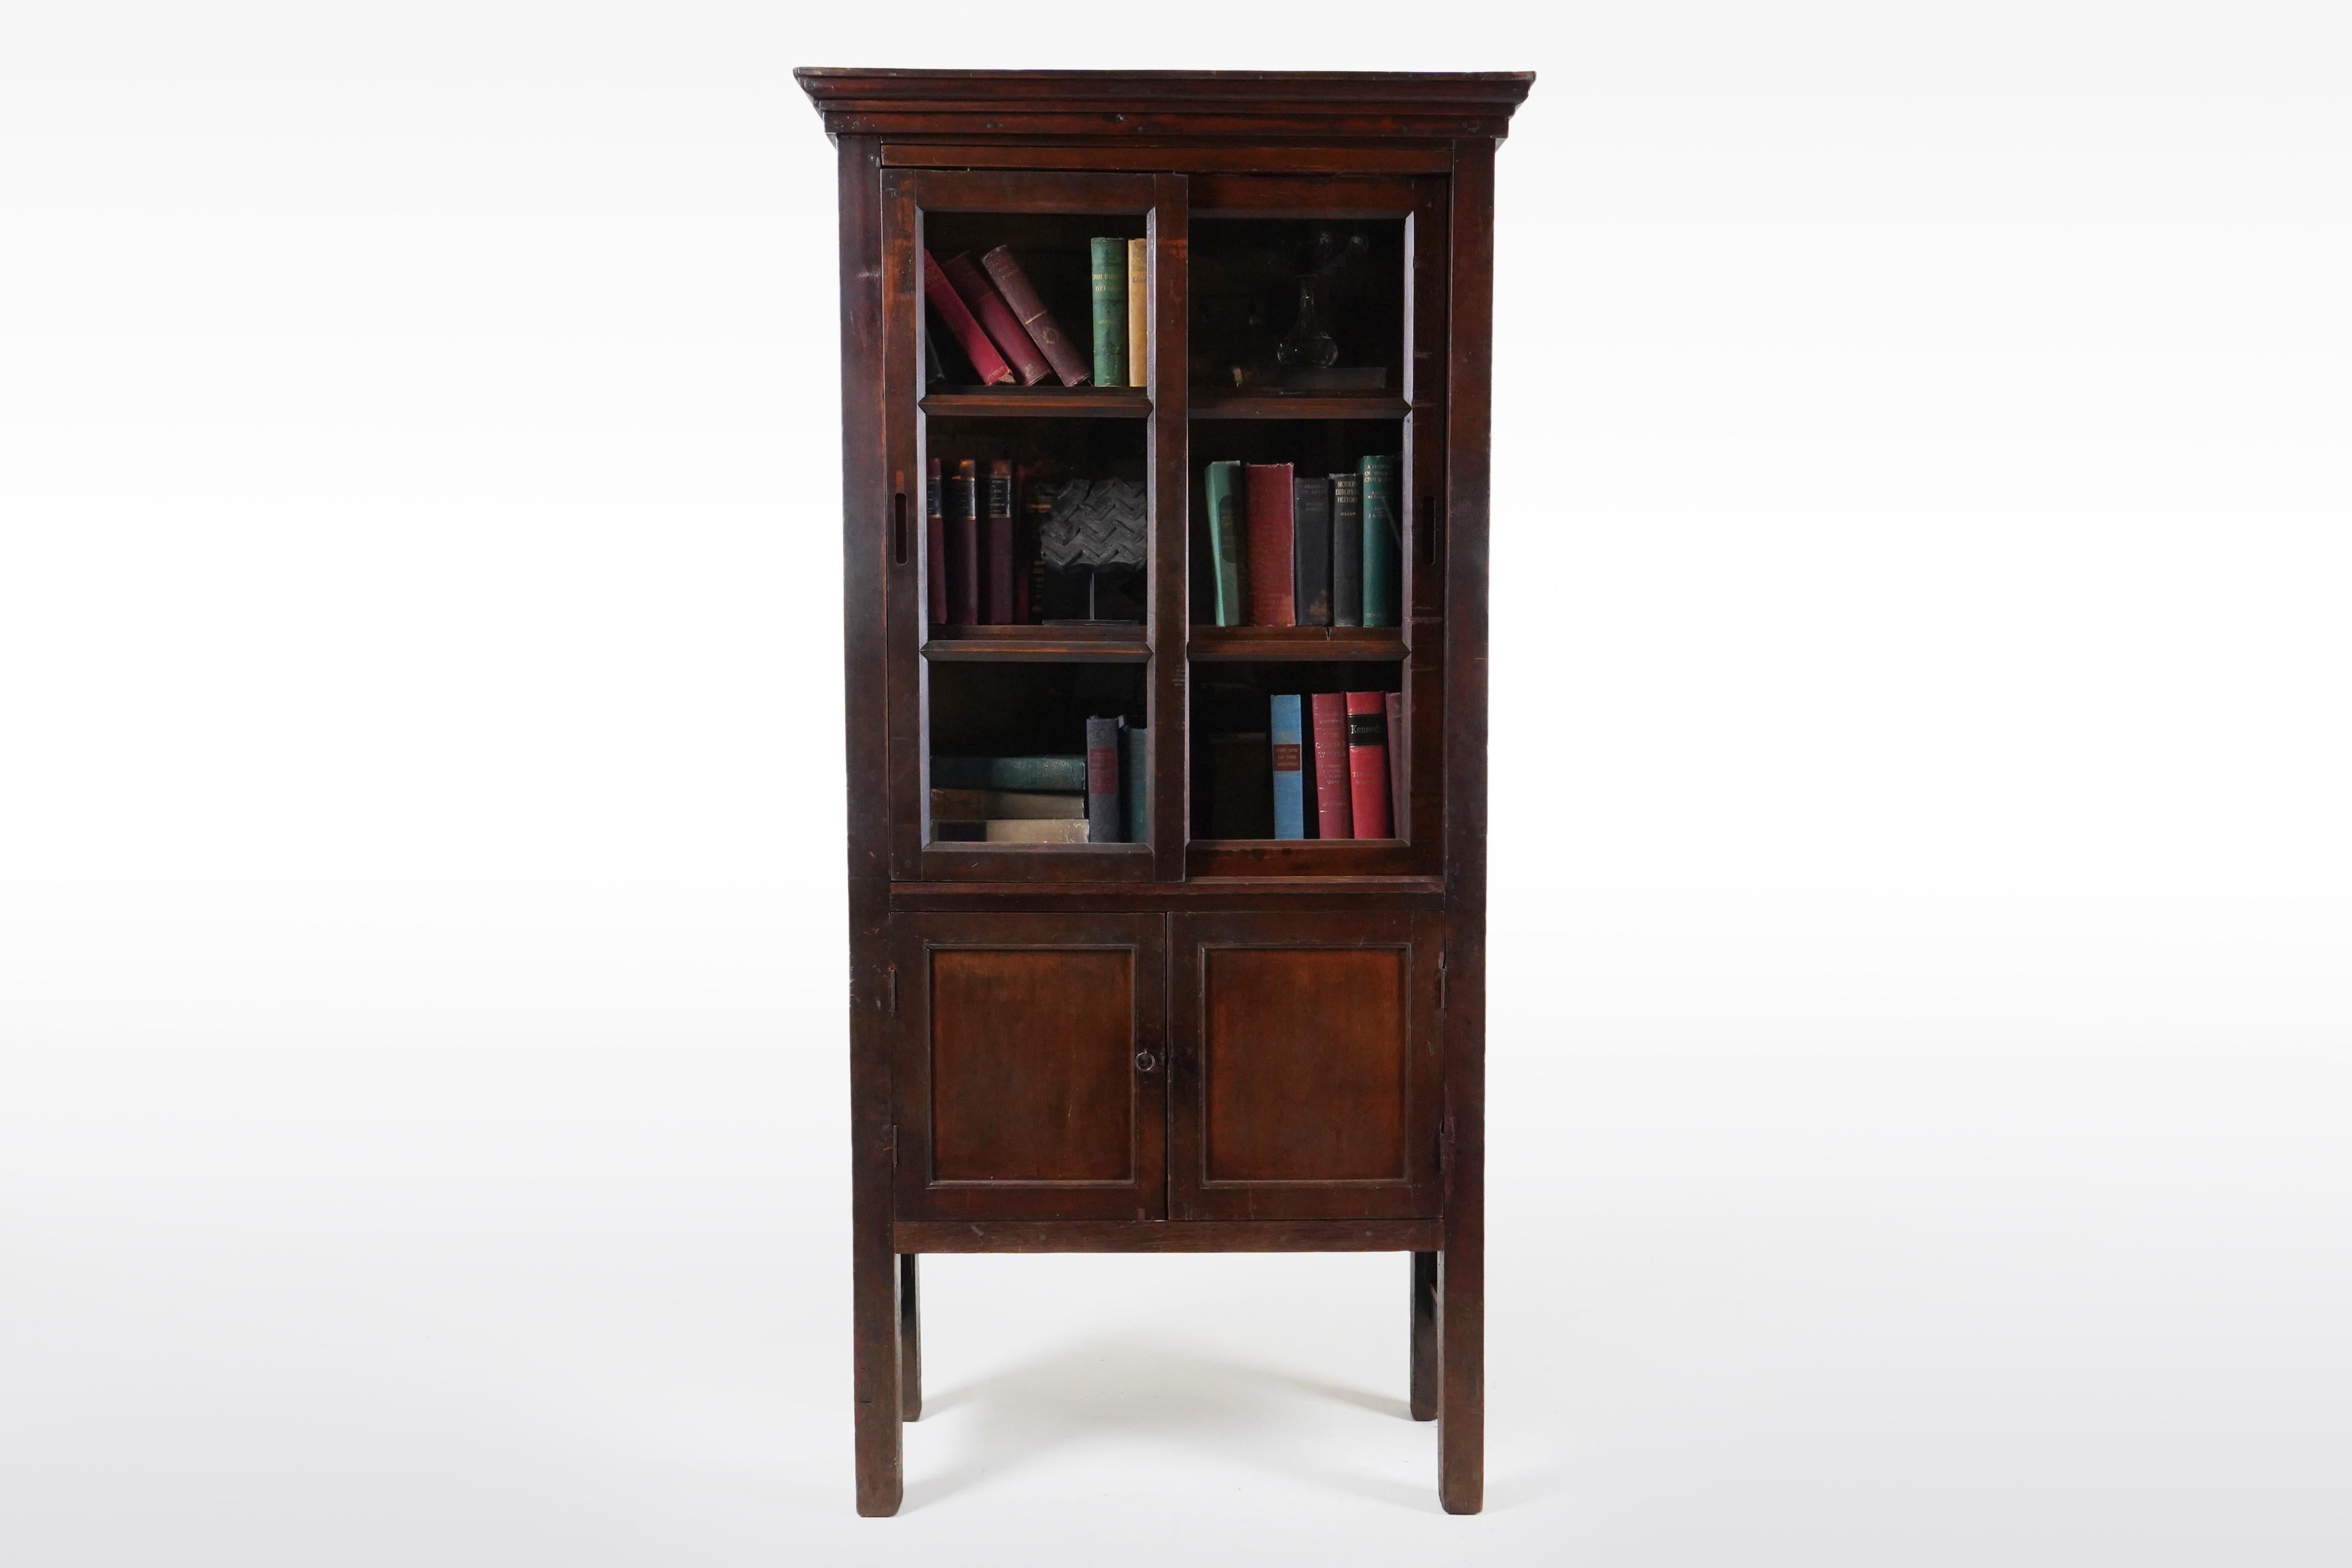 A tall British Colonial teak wood storage cabinet with glass doors,c. 1920. This sturdy antique display cabinet features a crown and a tall case with pair of three-panel front doors, set with glass. This piece is made of teak wood, which has